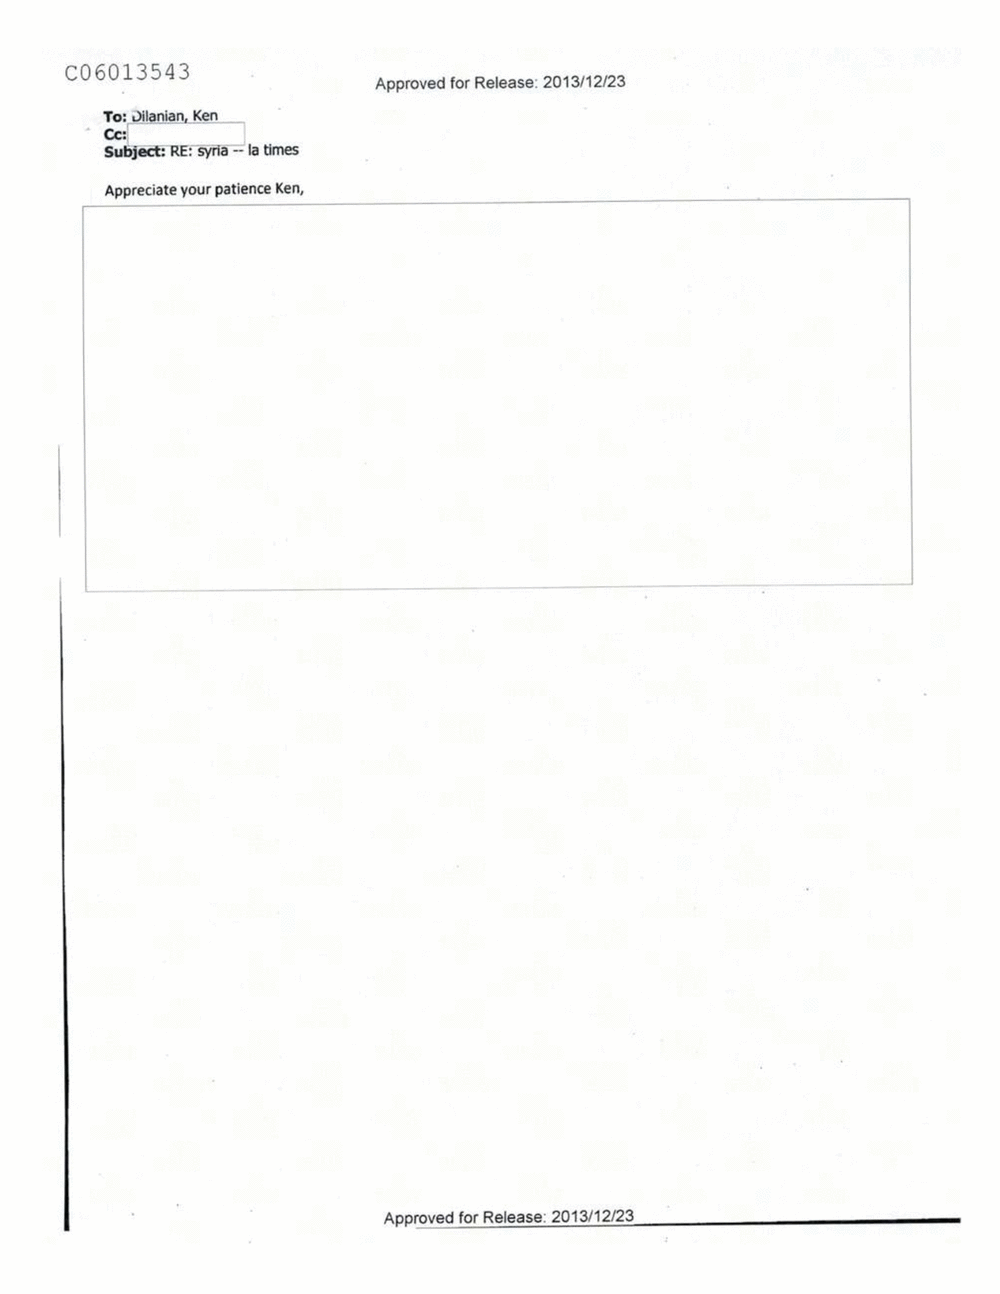 Page 404 from Email Correspondence Between Reporters and CIA Flacks